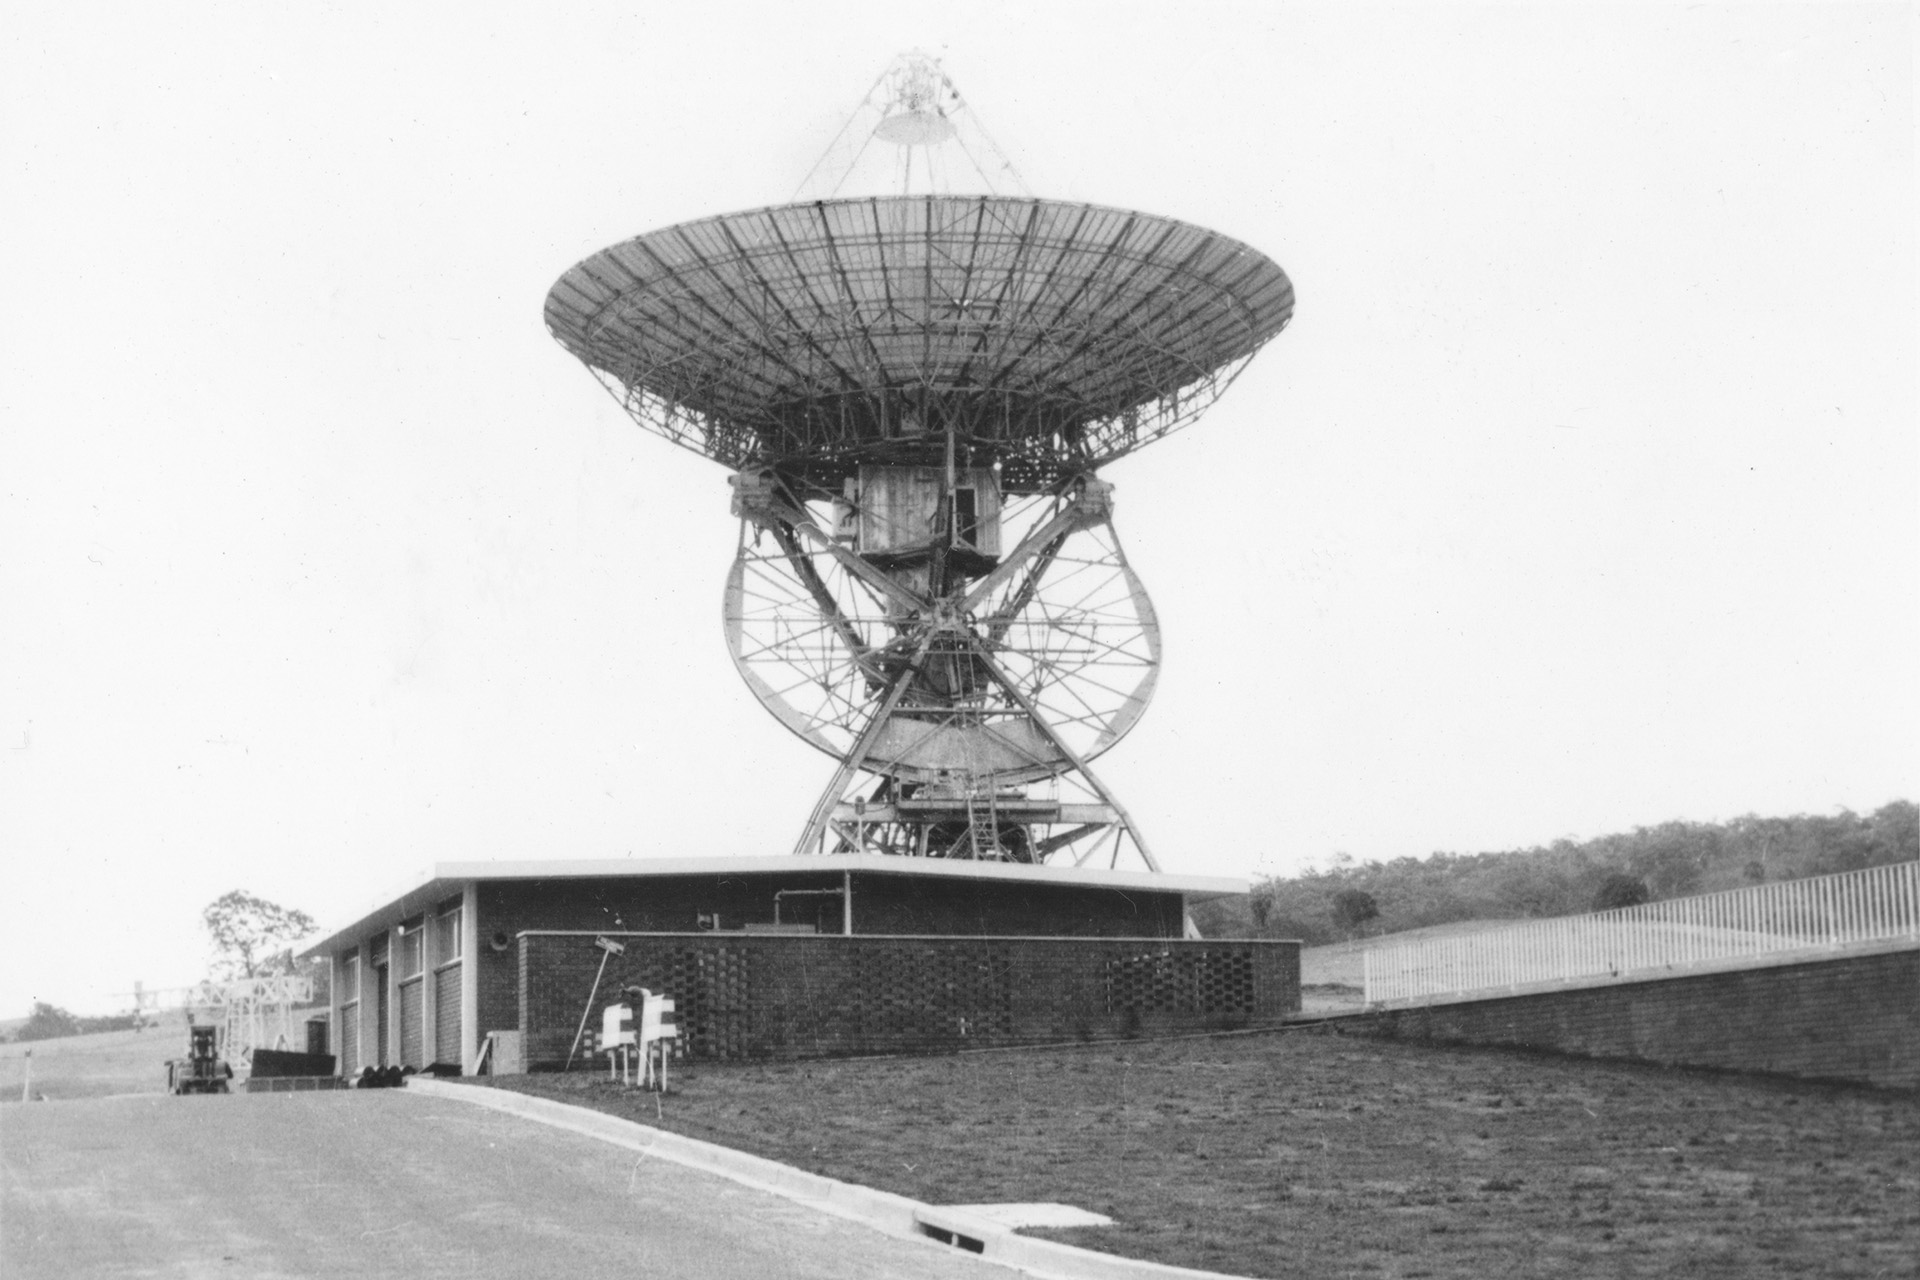 A black and white photo of a 26-meter antenna at the Tidbinbilla Deep Space Instrumentation Facility (now the Canberra Deep Space Communication Complex) in July 1969. The antenna, Deep Space Station 42, points to the sky.